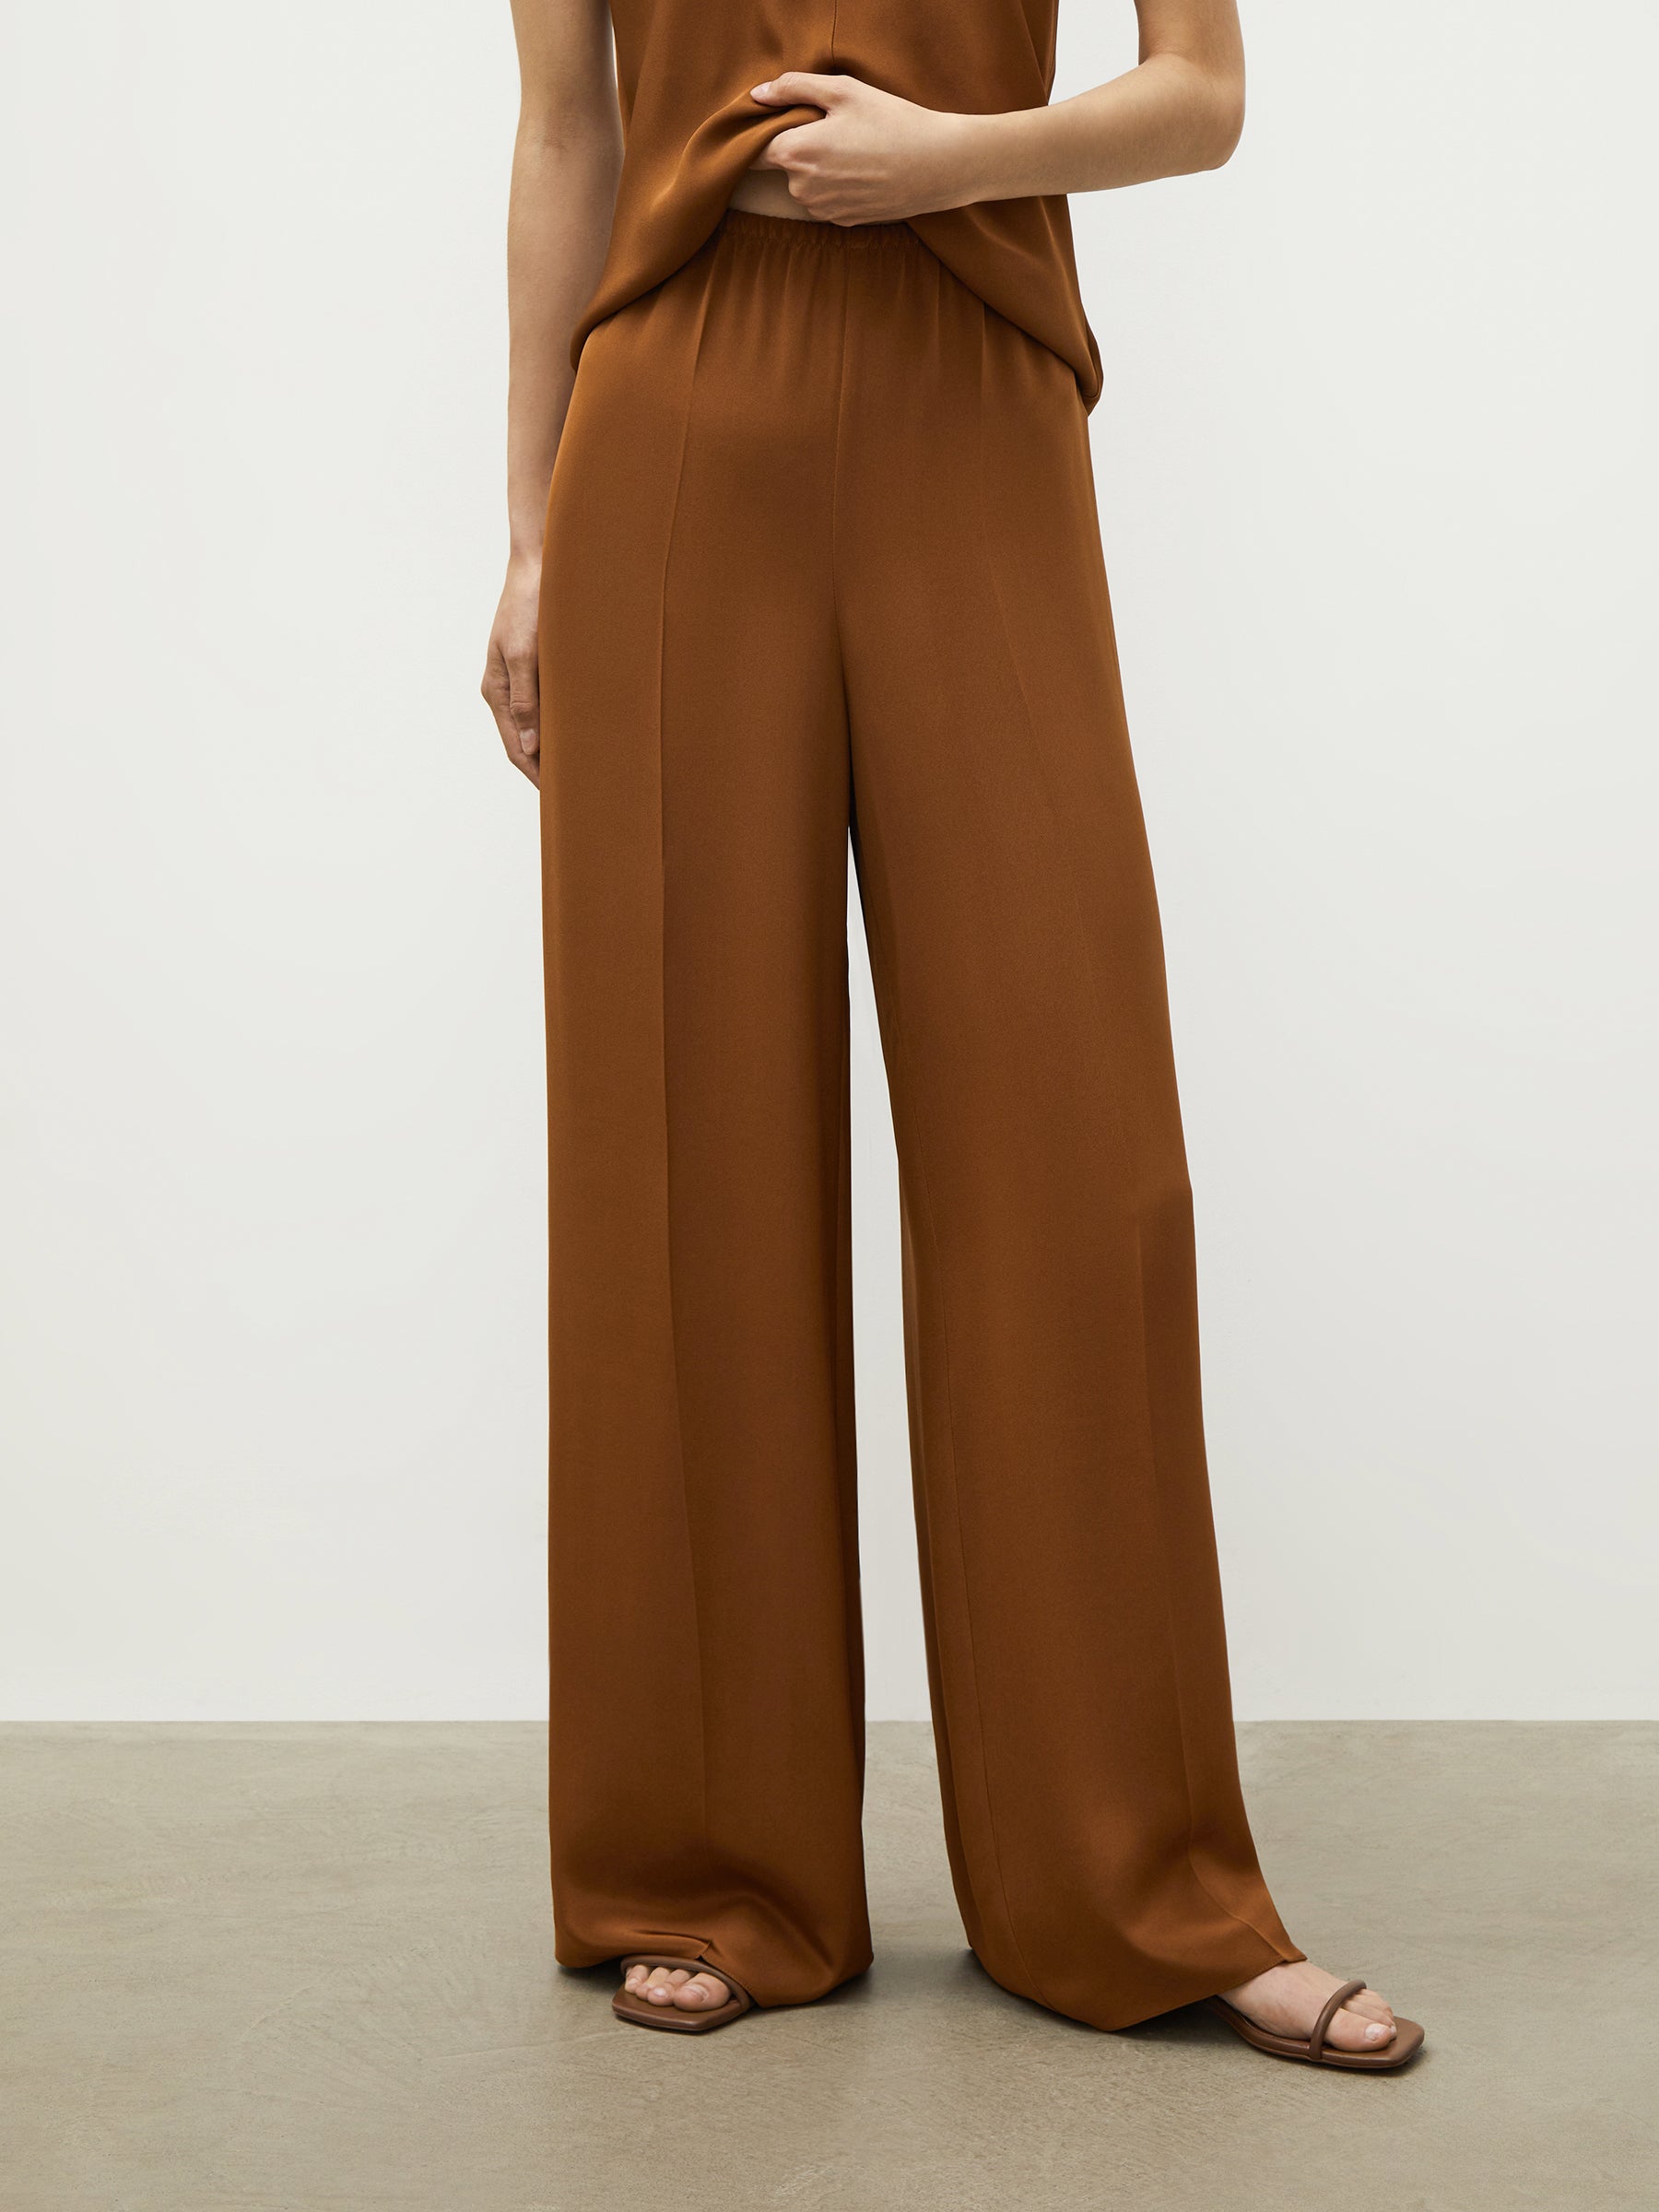 Mulberry silk trousers